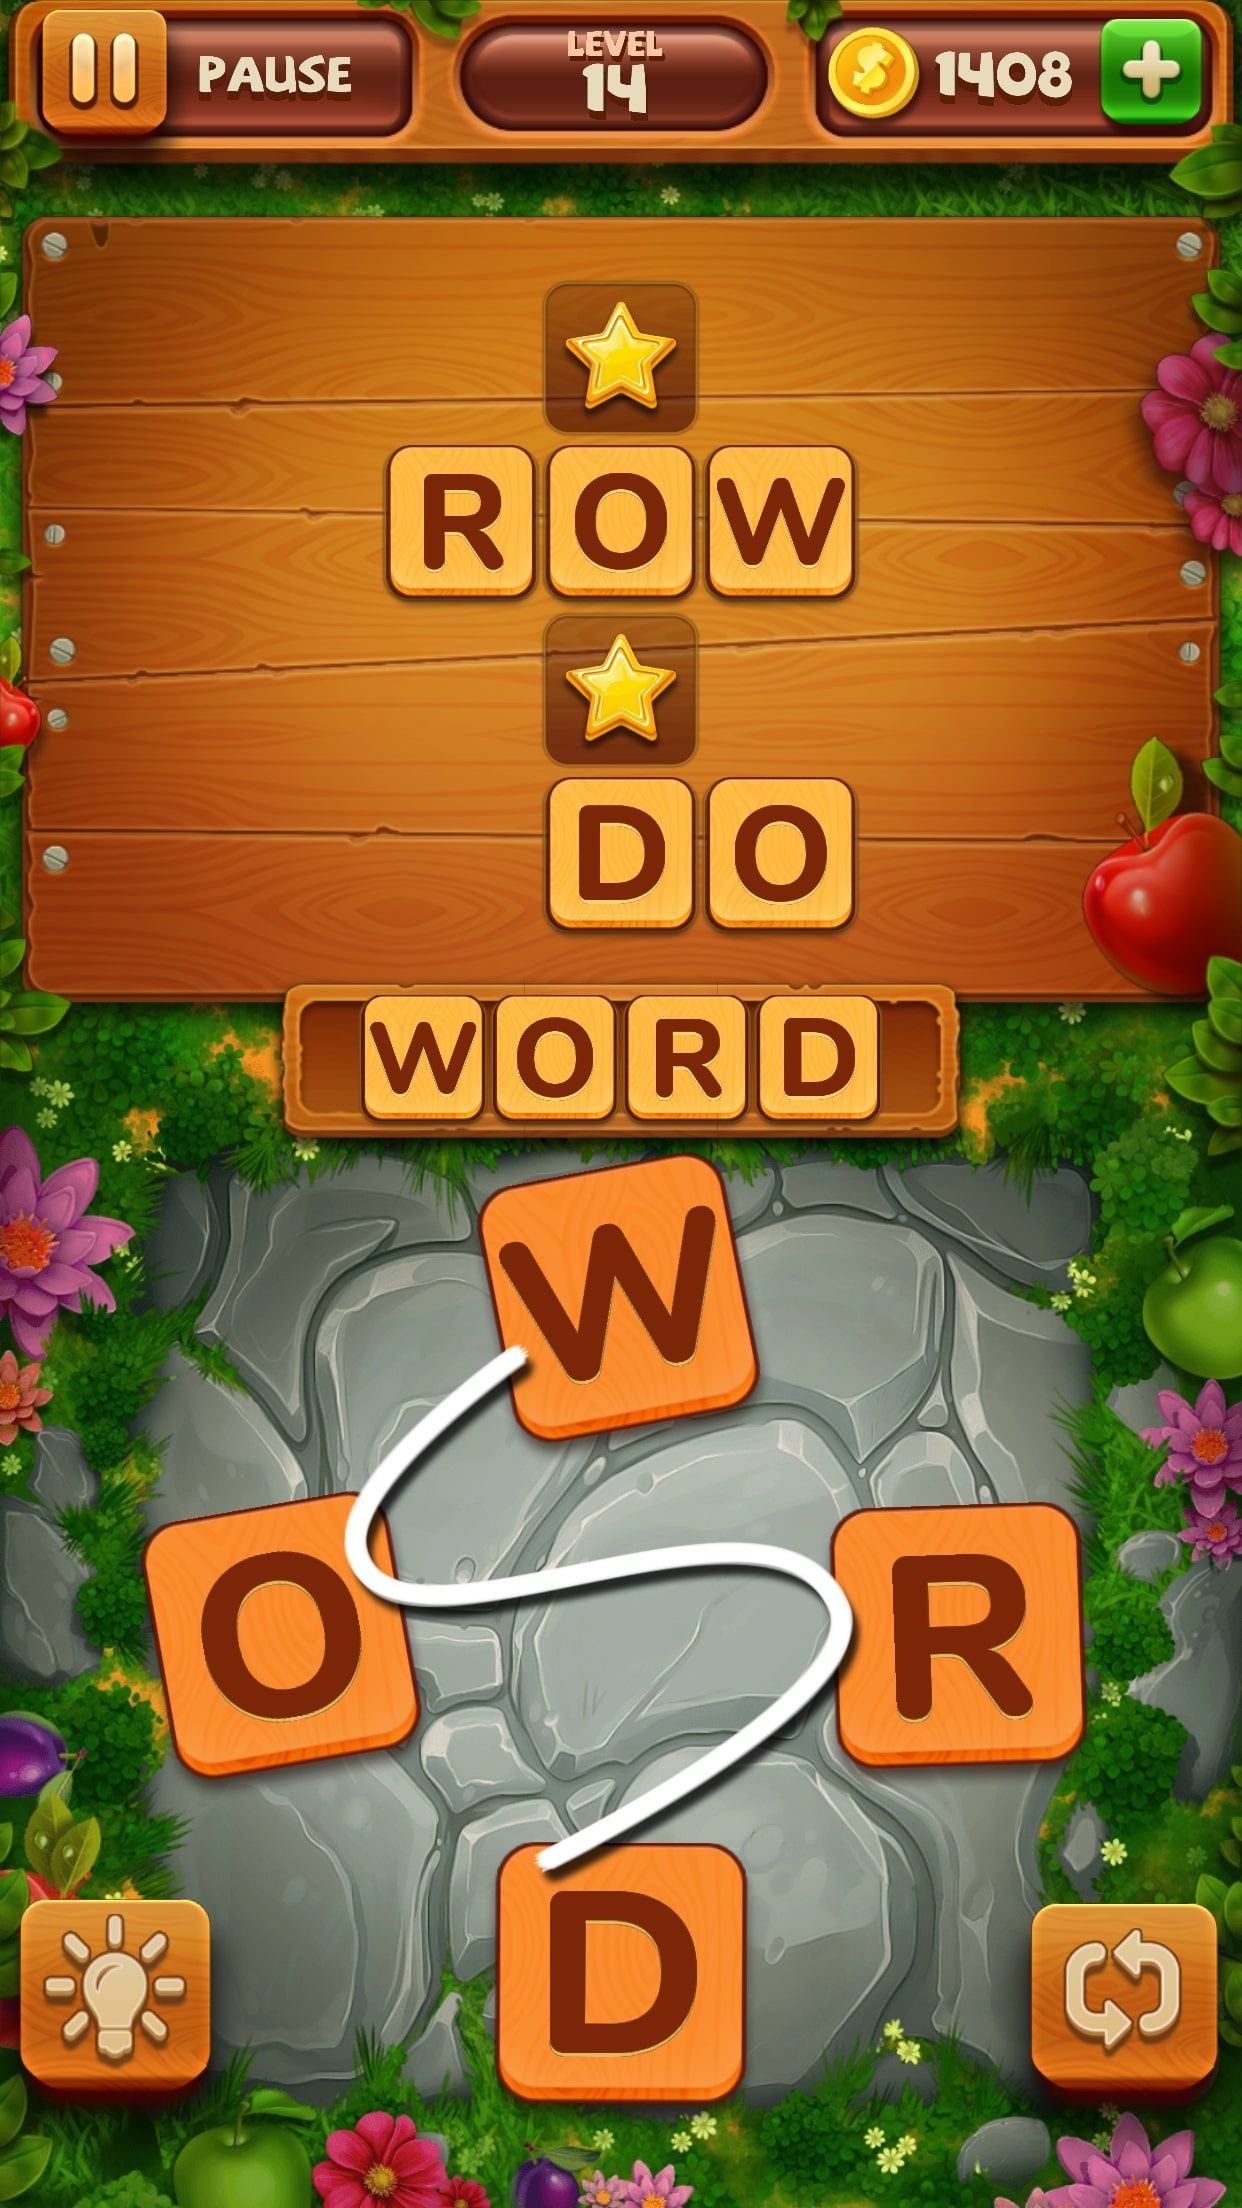 best-word-games-android-word-yard-level-14